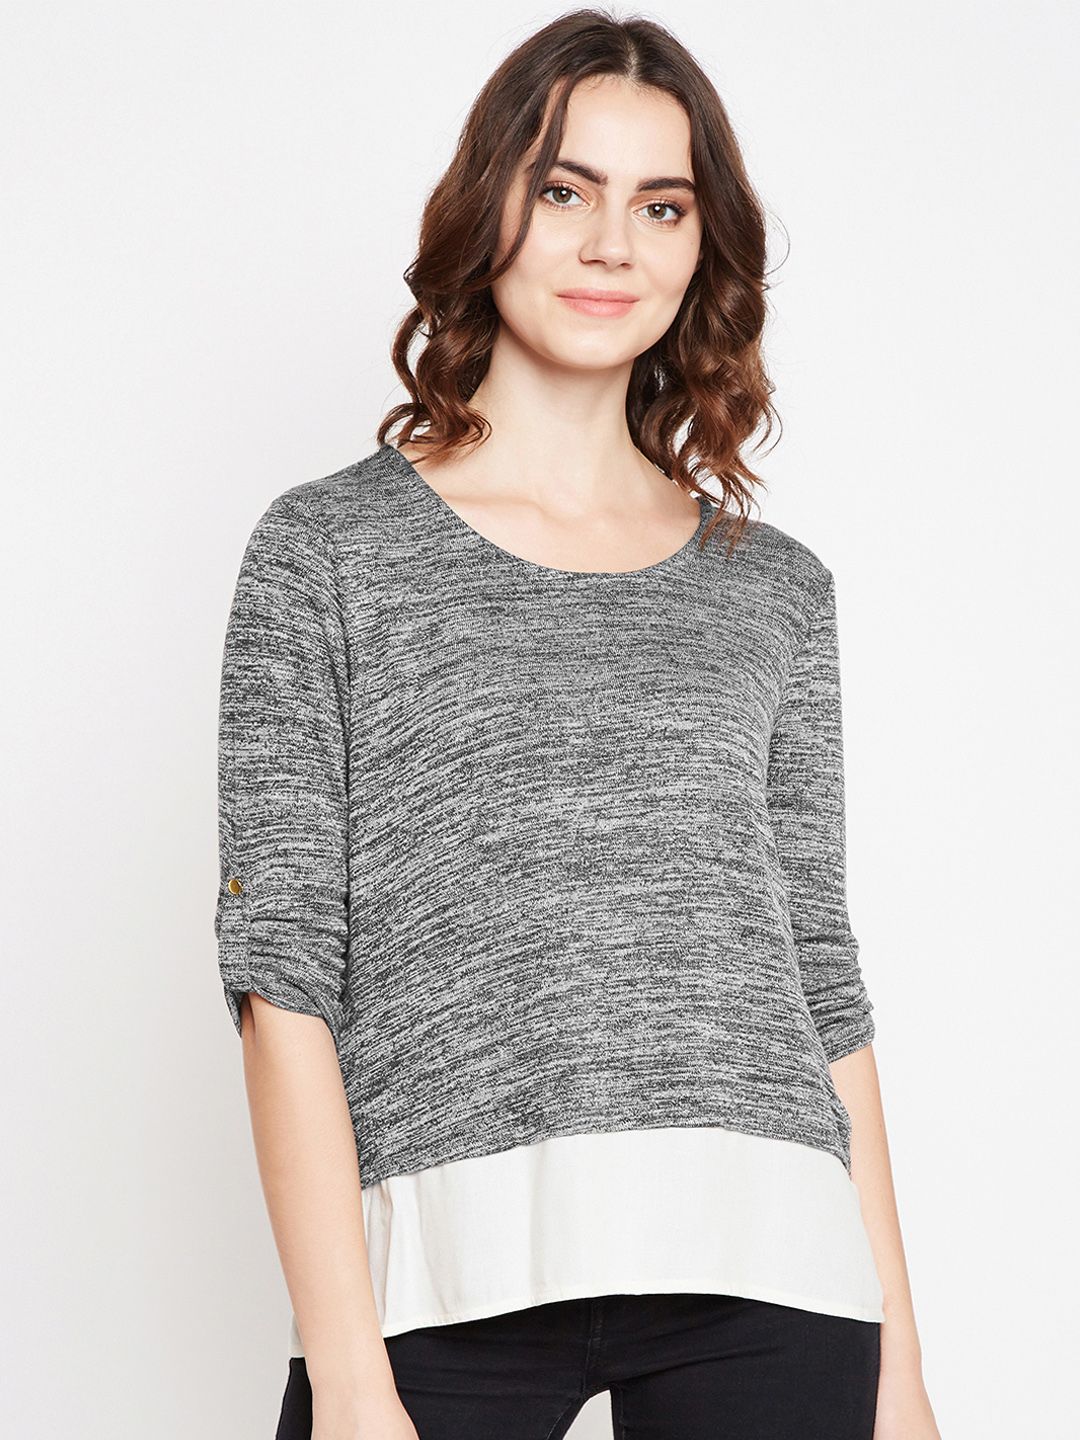 Taanz Women Grey & Off-White Colourblocked Layered Pullover Sweater Price in India